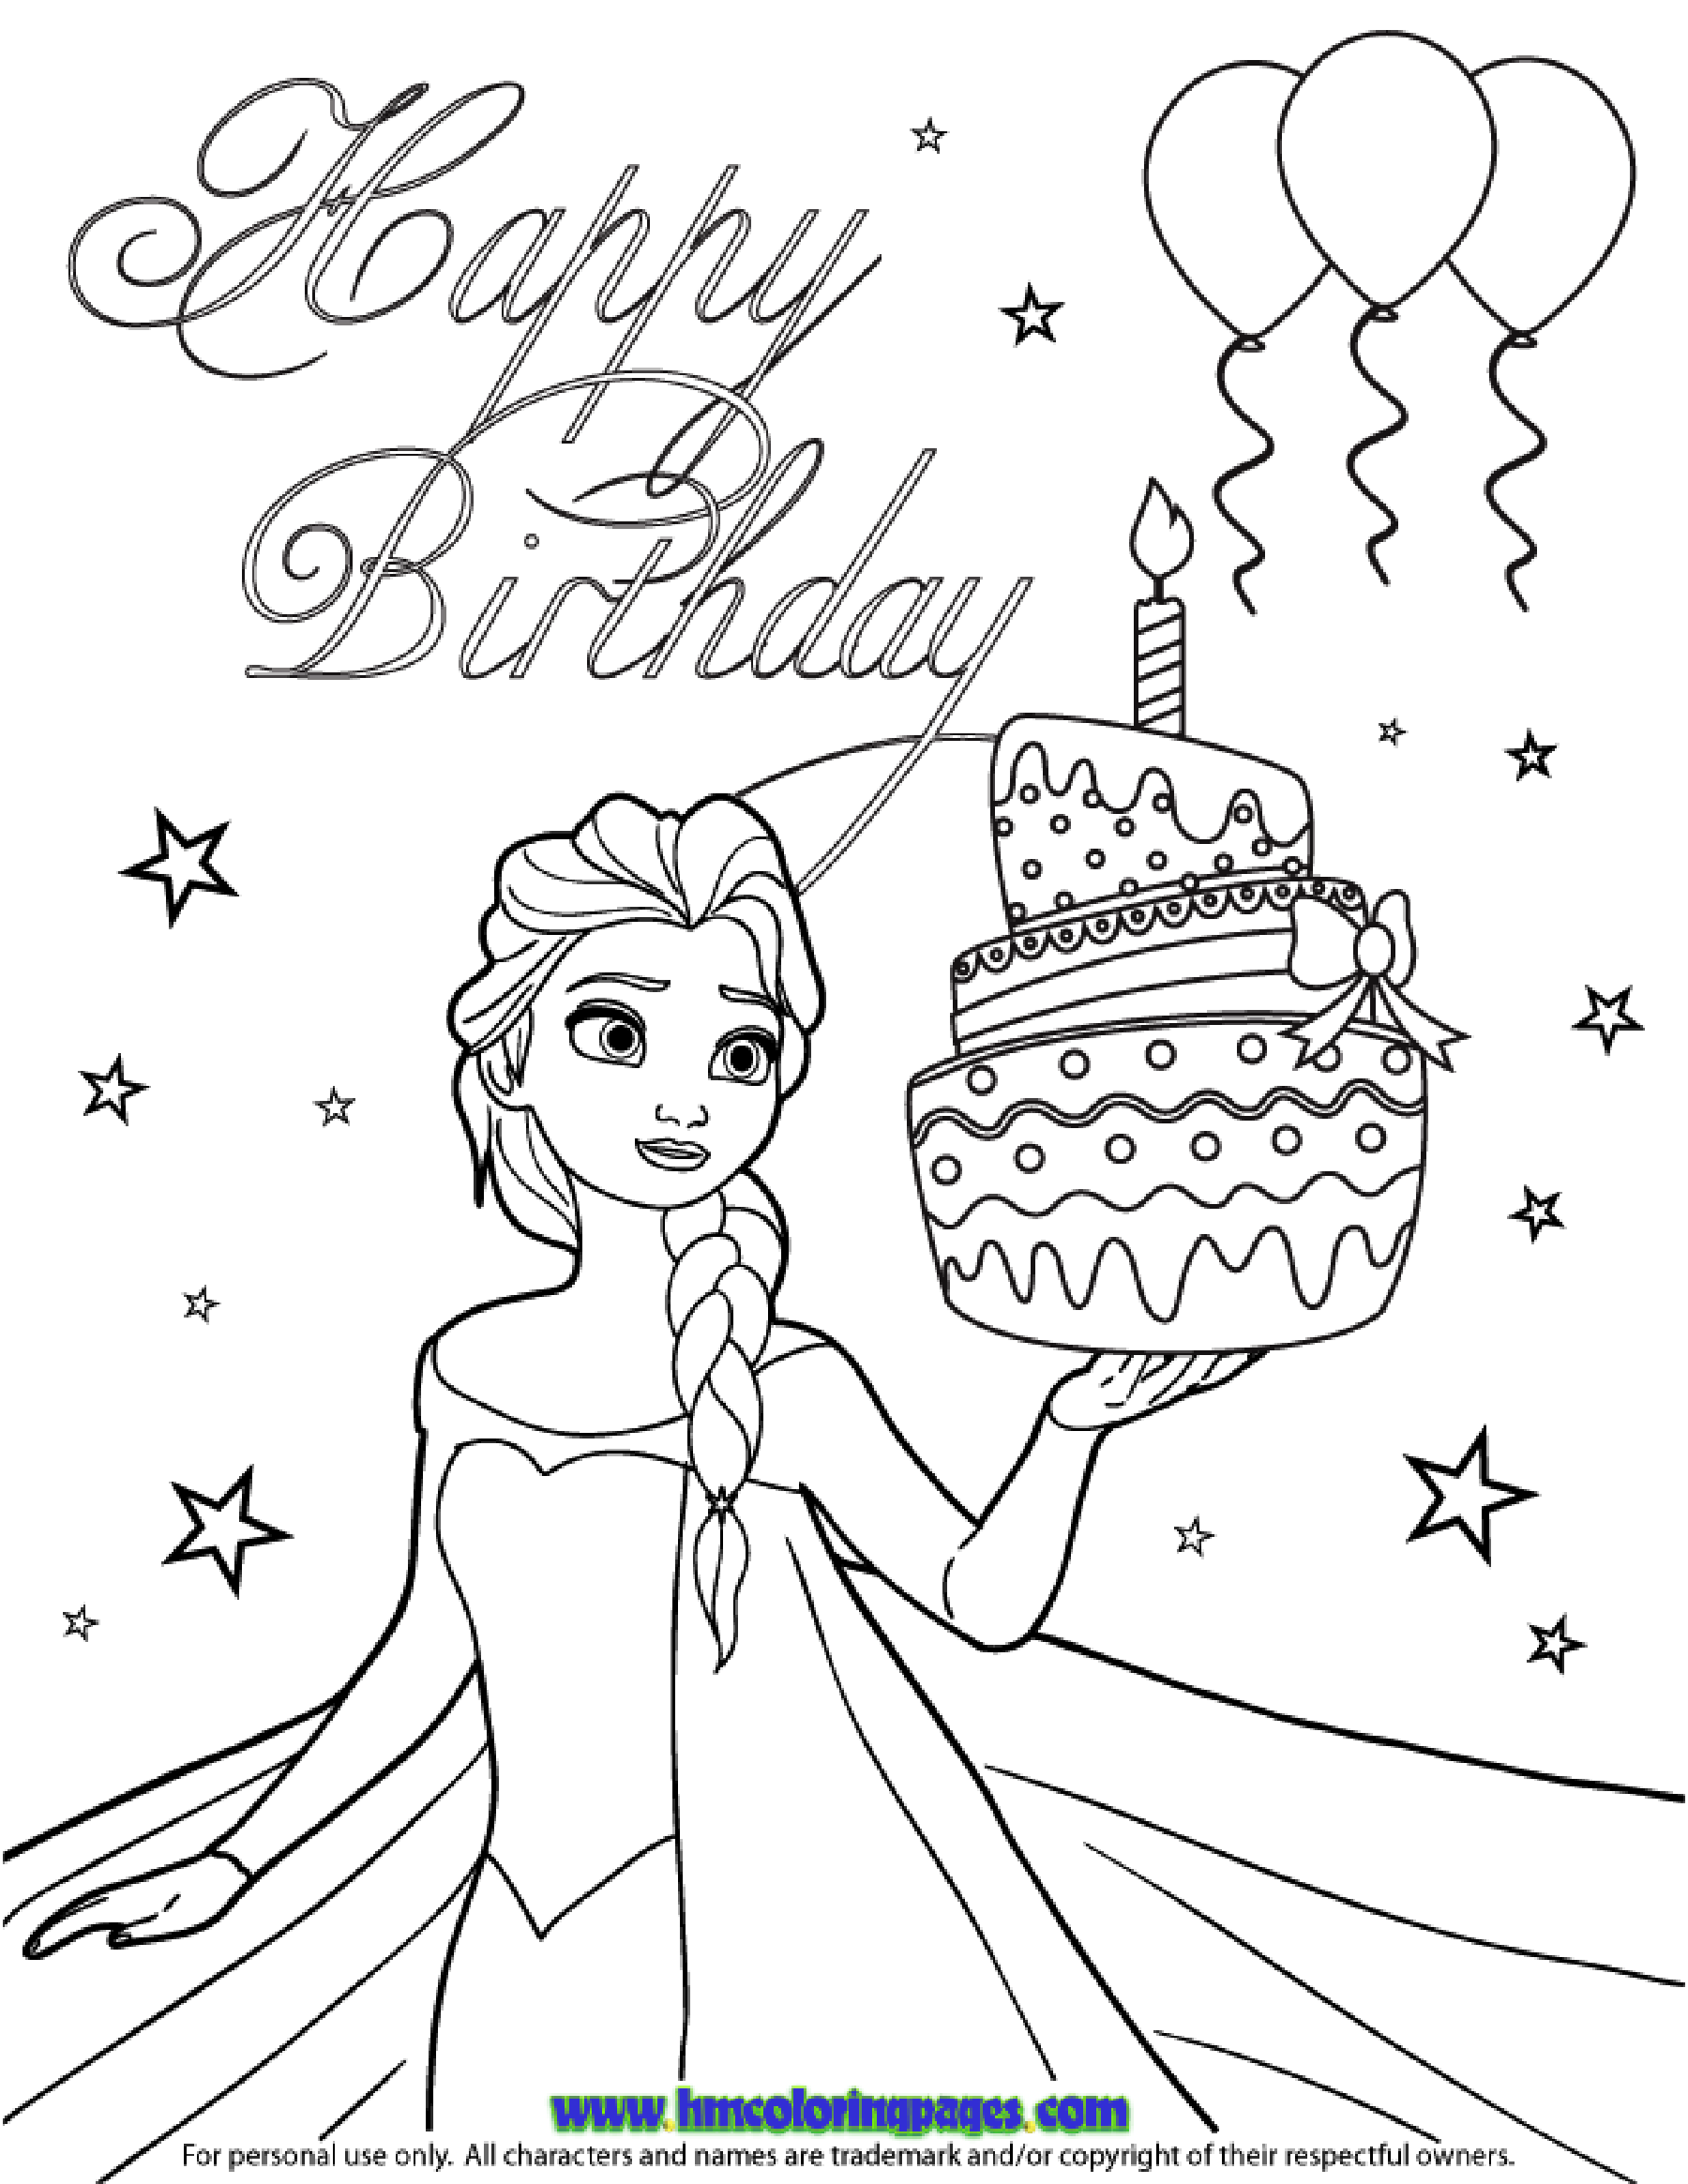 frozen characters coloring pages coloring pages frozen coloring pages free and printable frozen coloring characters pages 